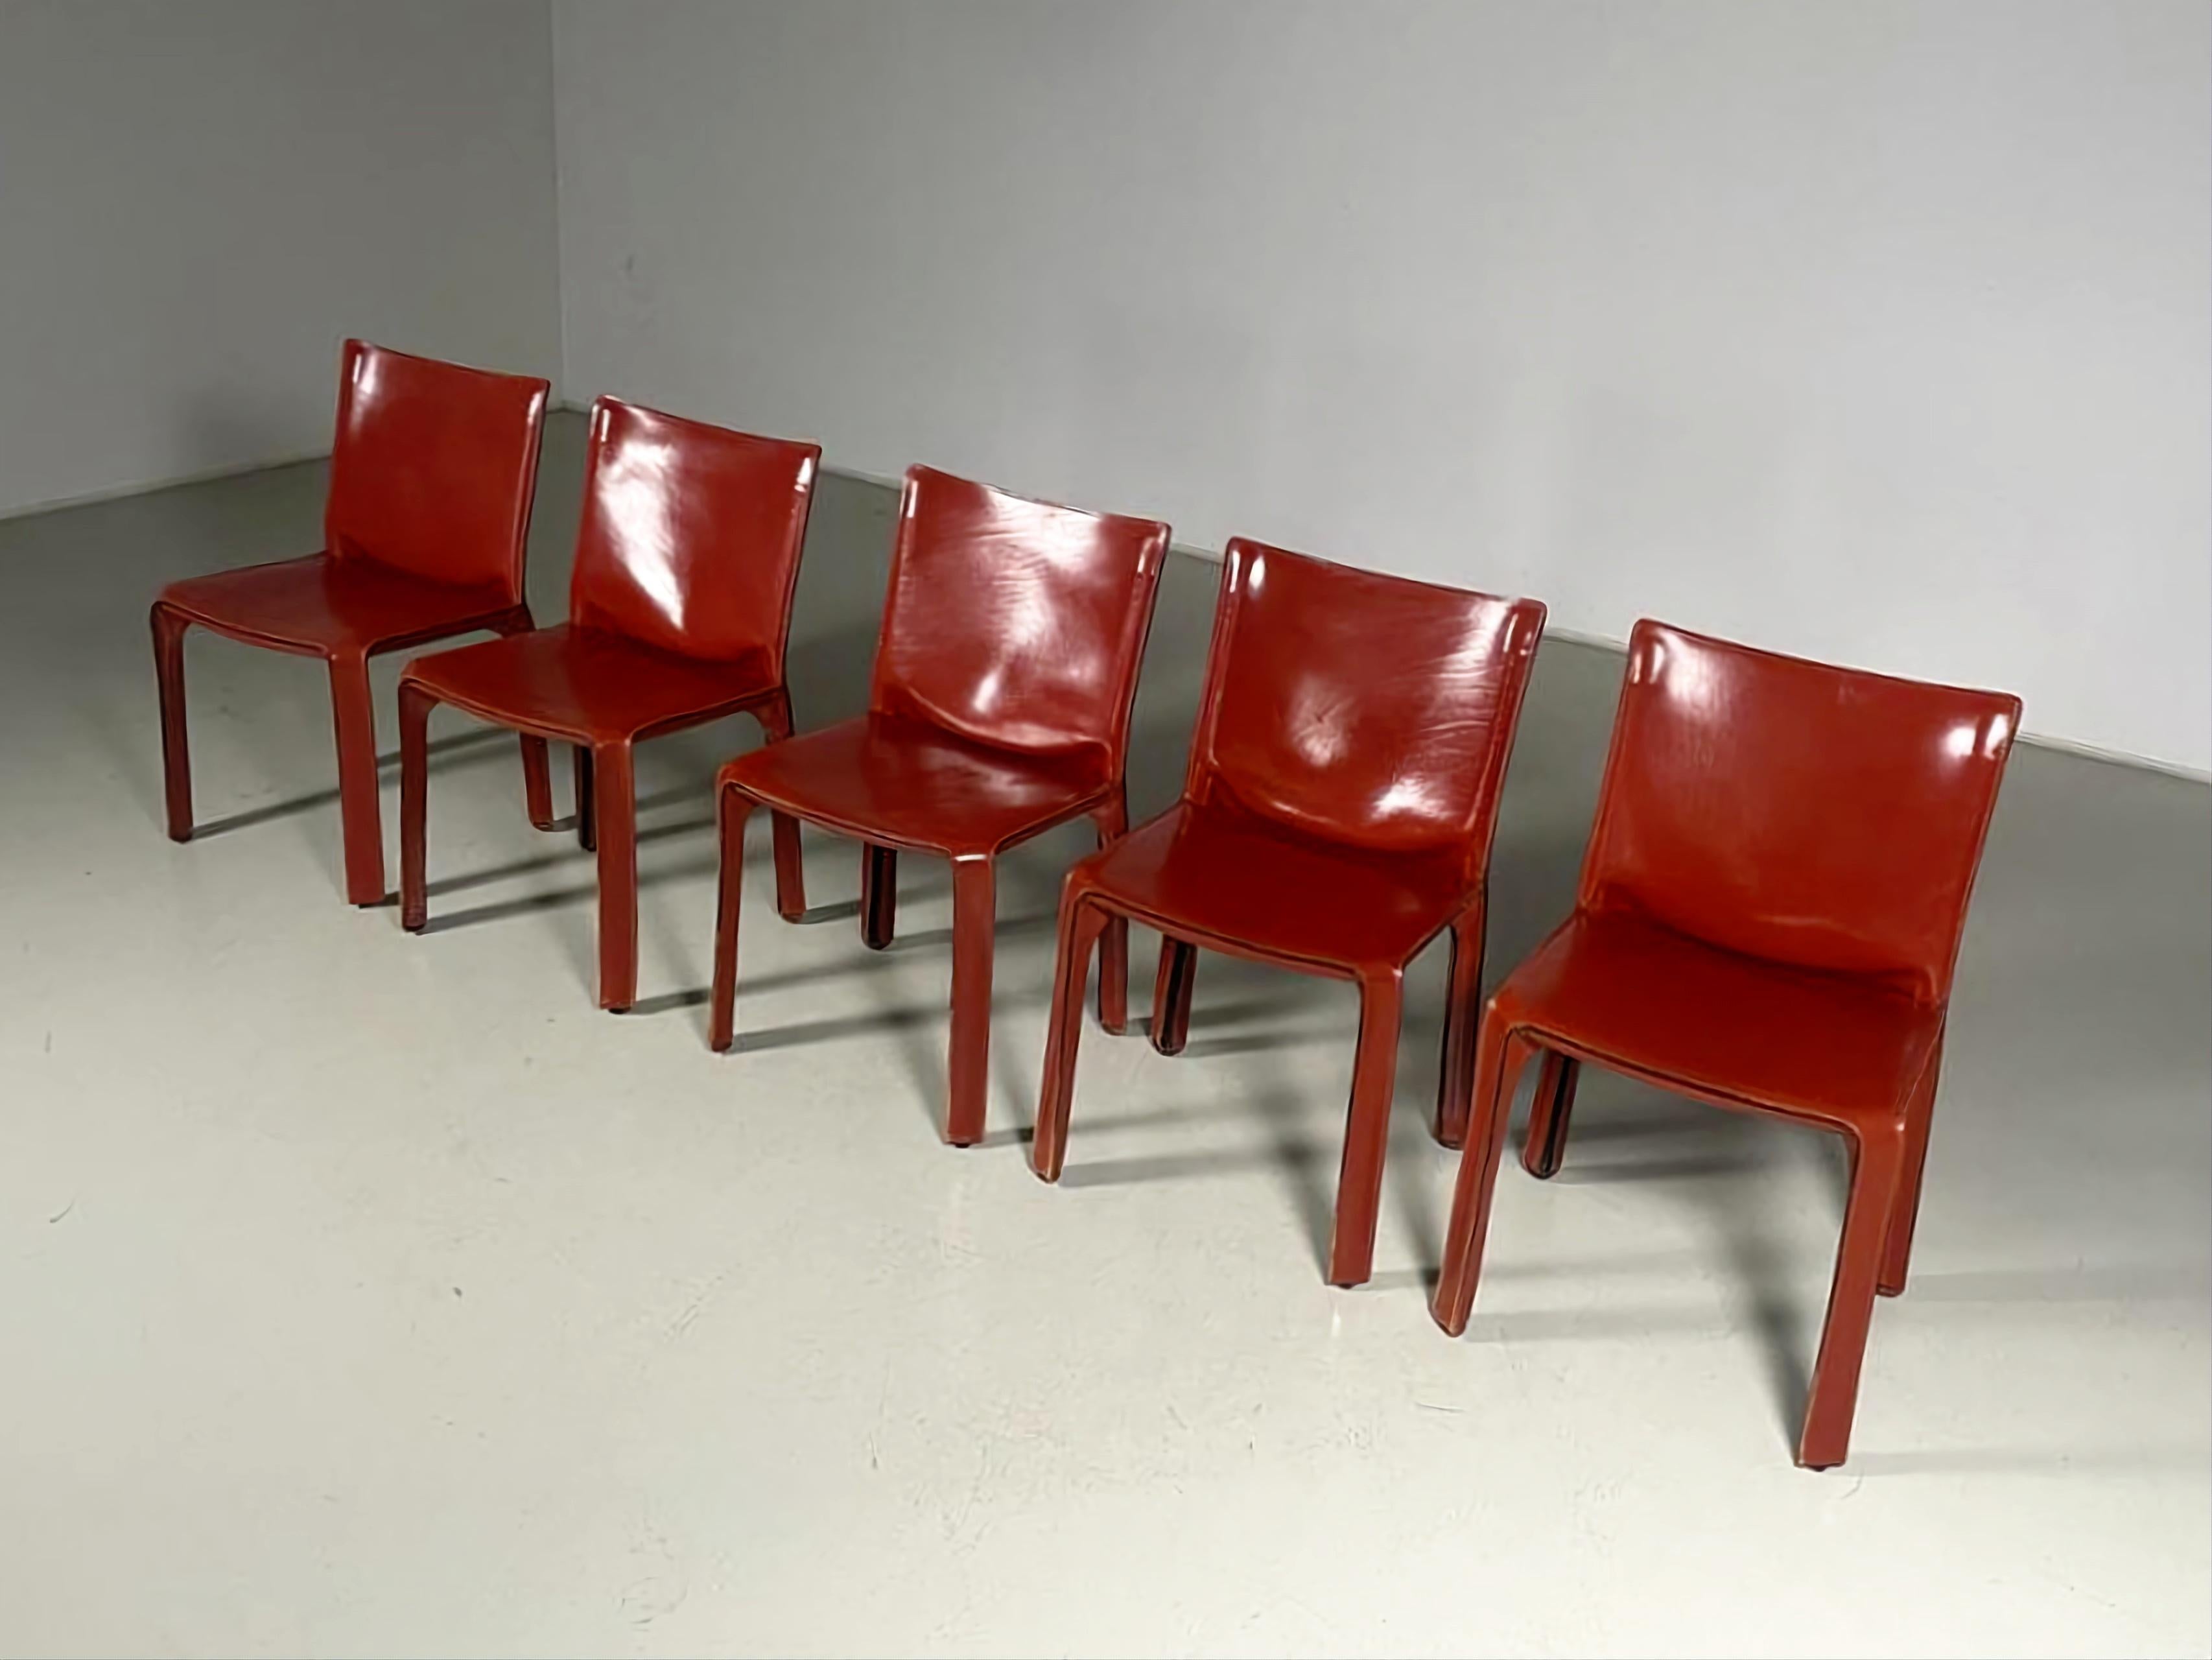 Mid-Century Modern Set of 5 CAB 412 Chairs in Russian Red leather by Mario Bellini for Cassina